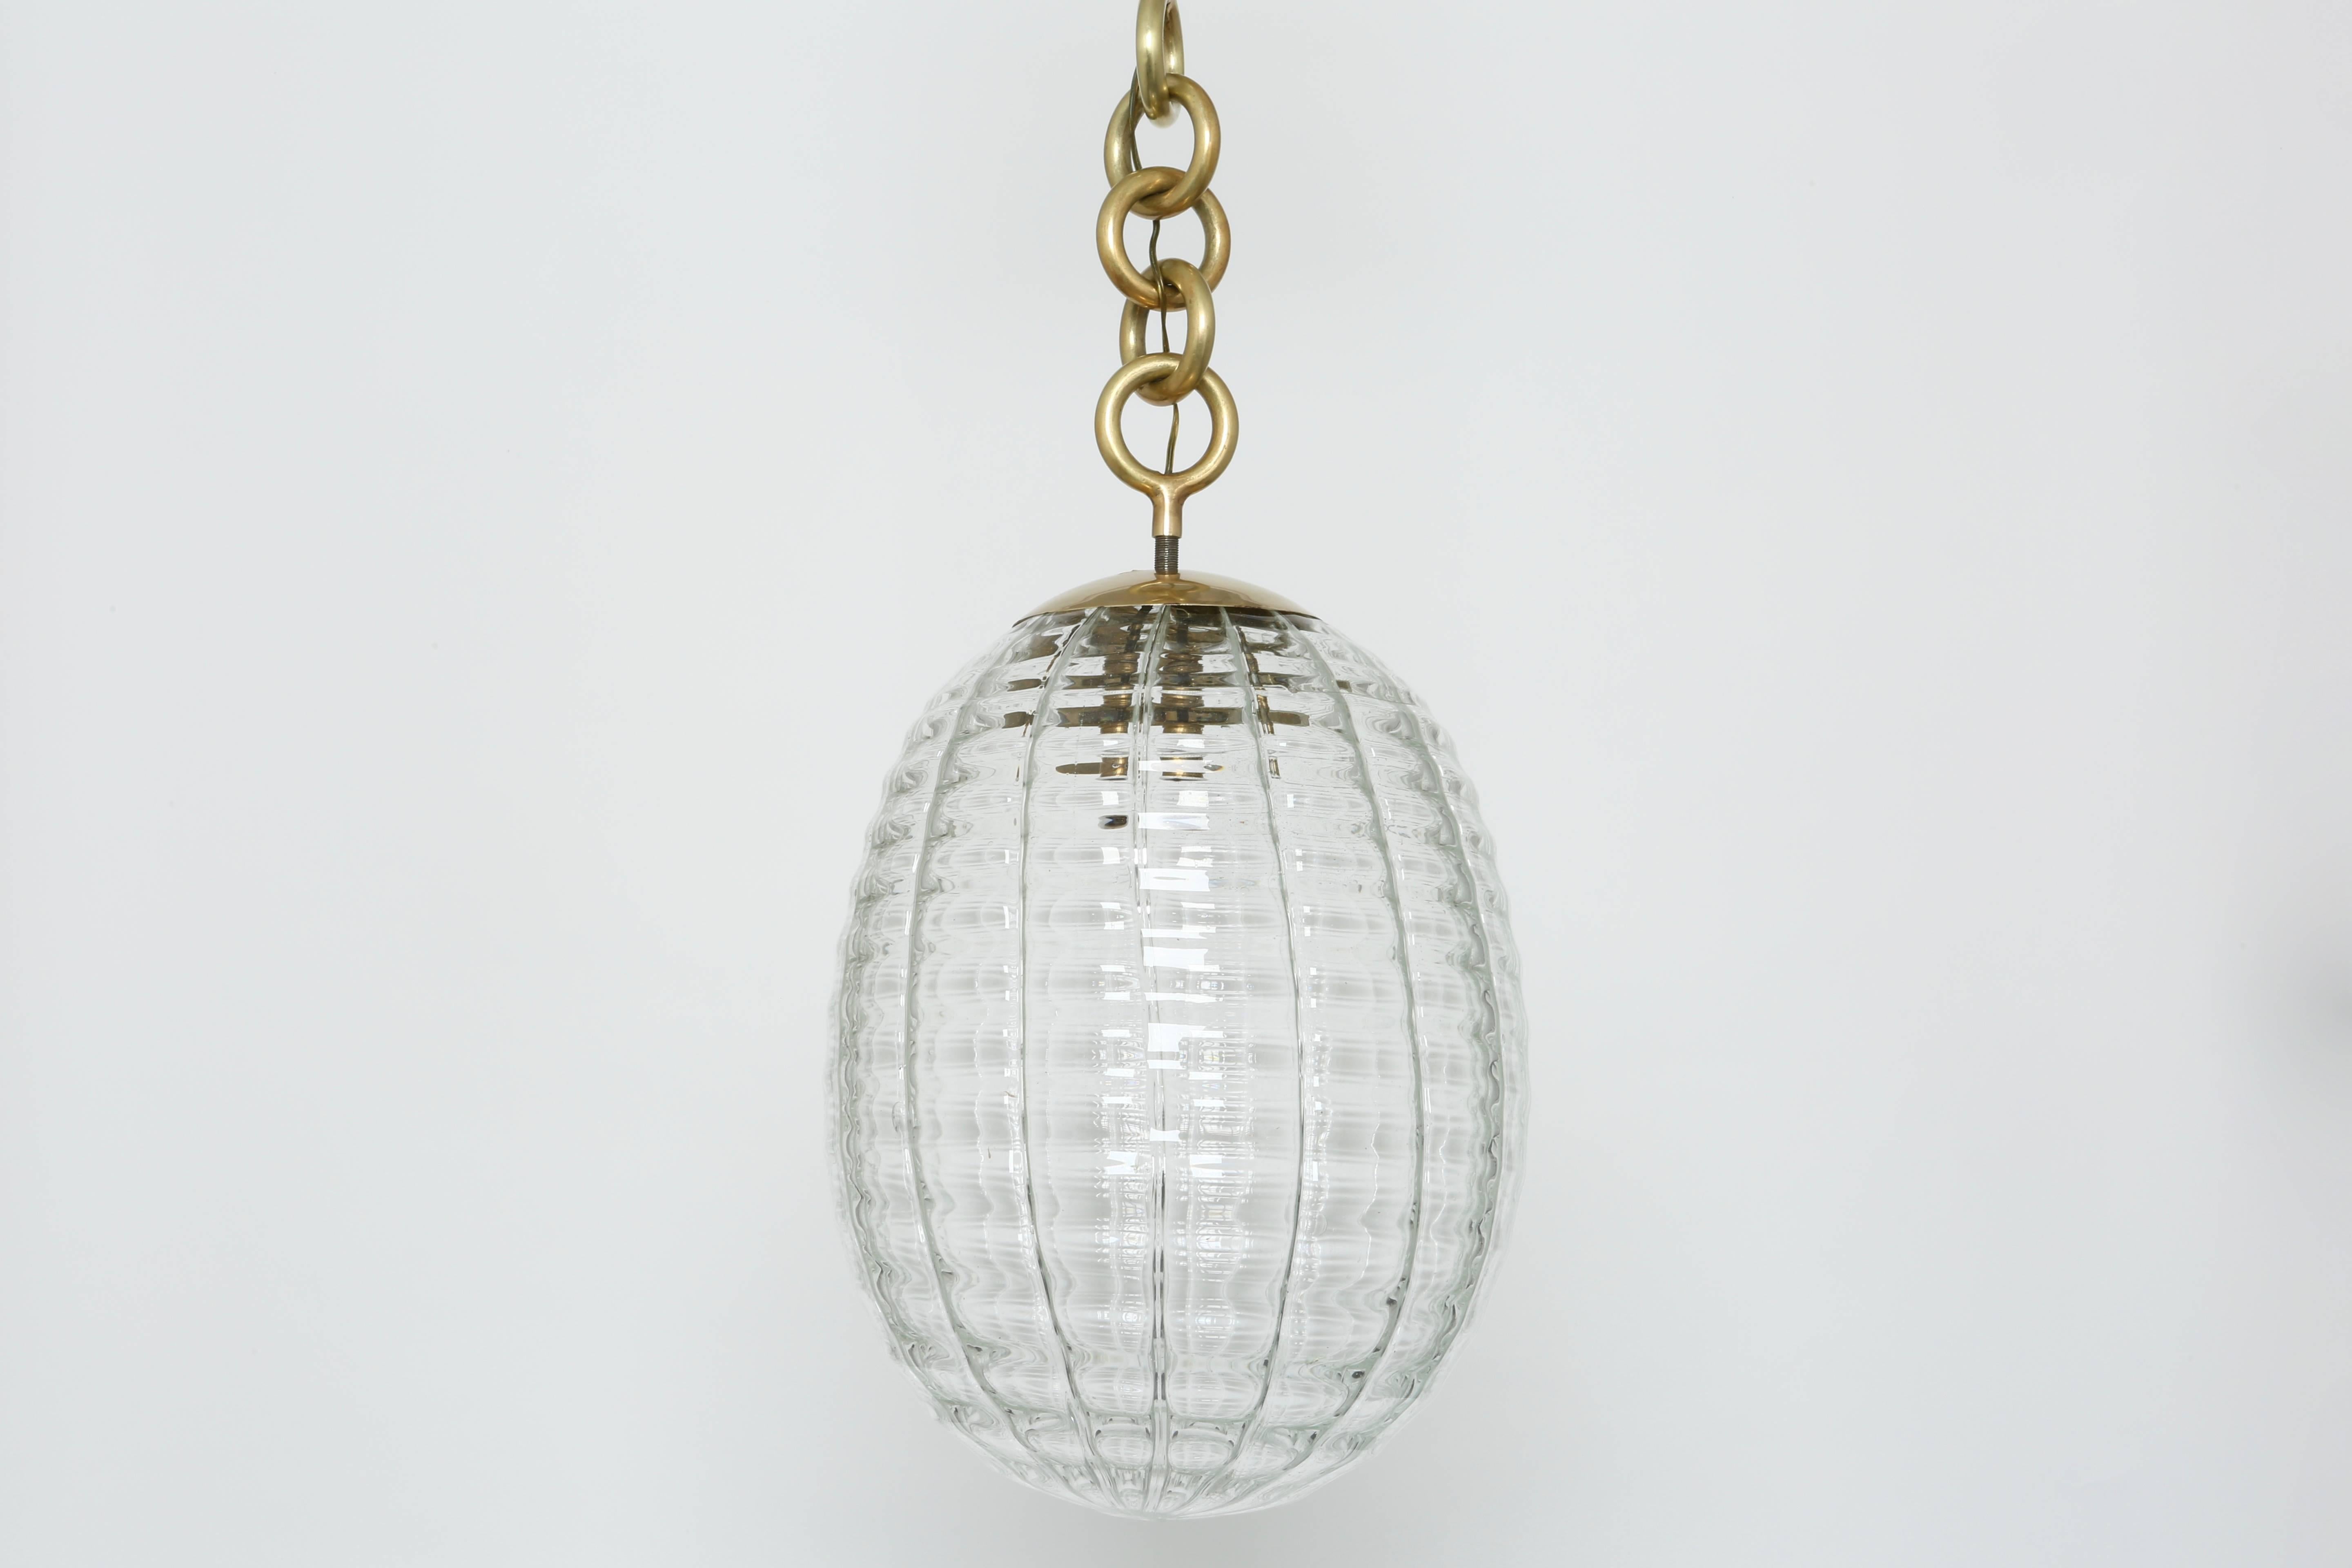 Venini ceiling pendant.
Made with hand blown glass and brass.
Italy, 1950s.
Two pendants available.